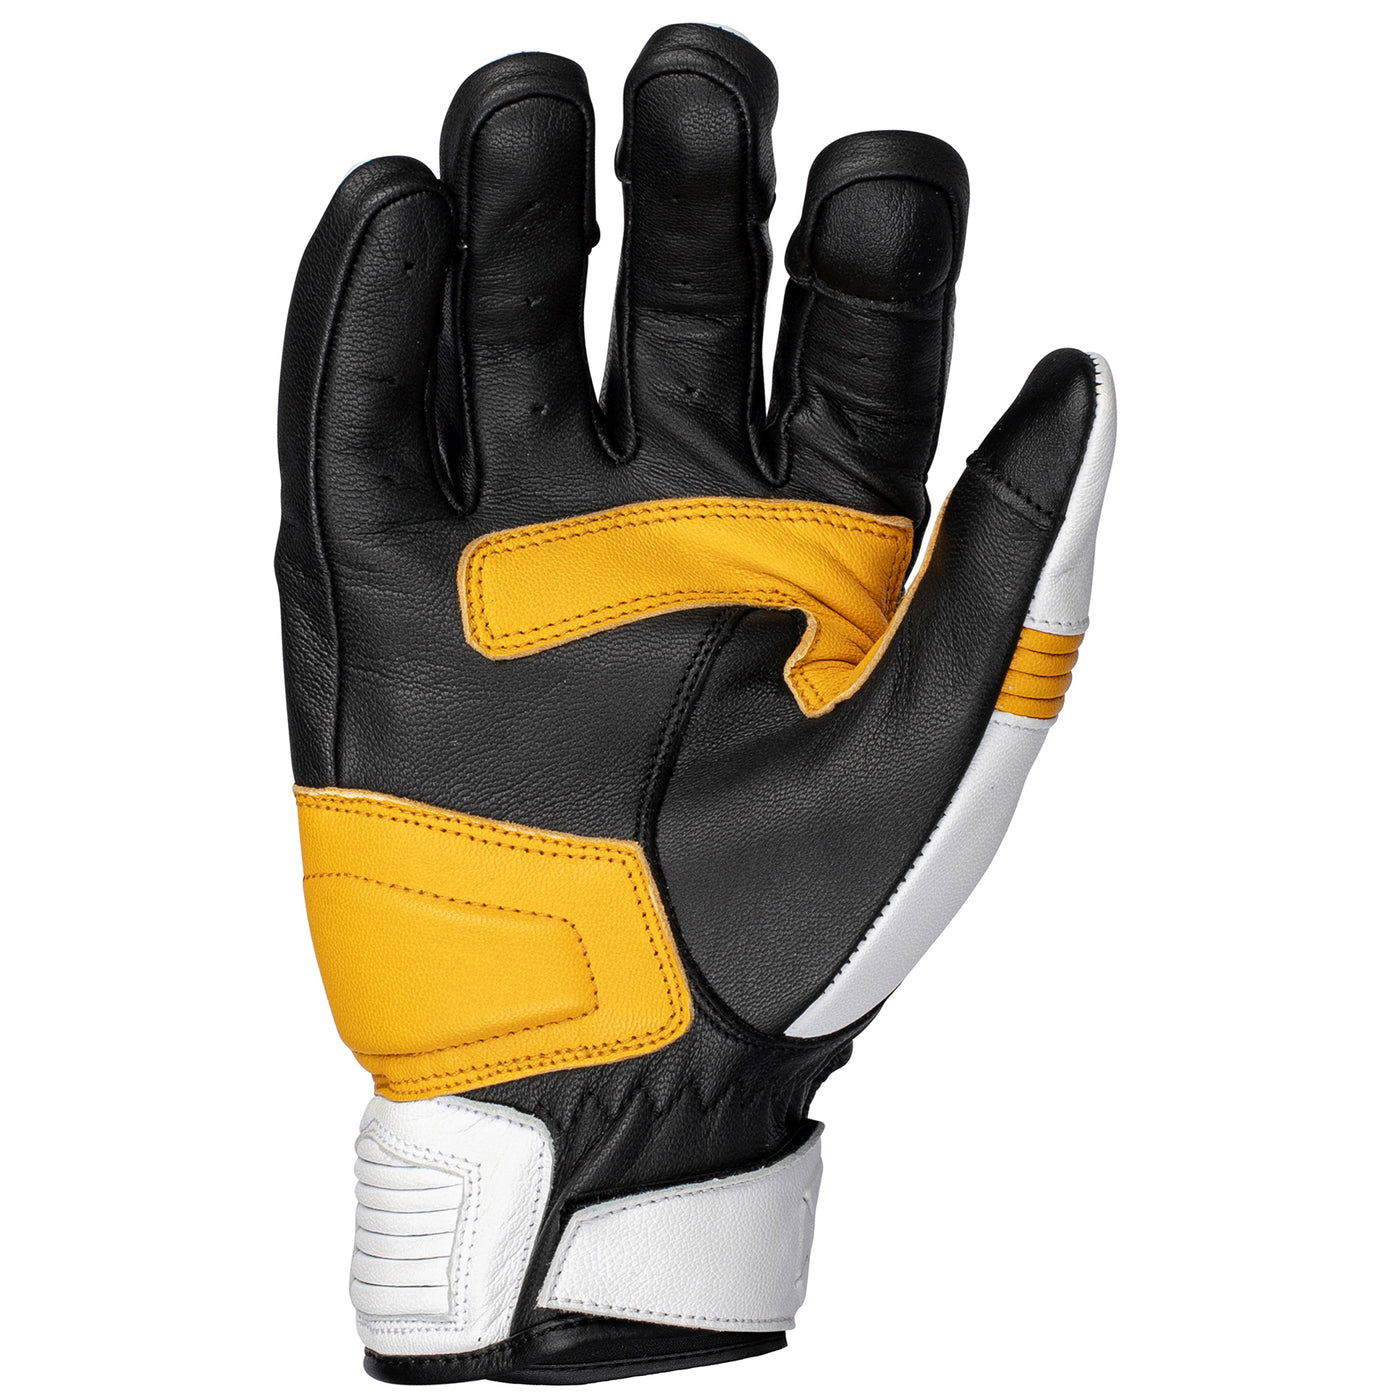 Cortech "The Associate" Mid-length Leather Gloves